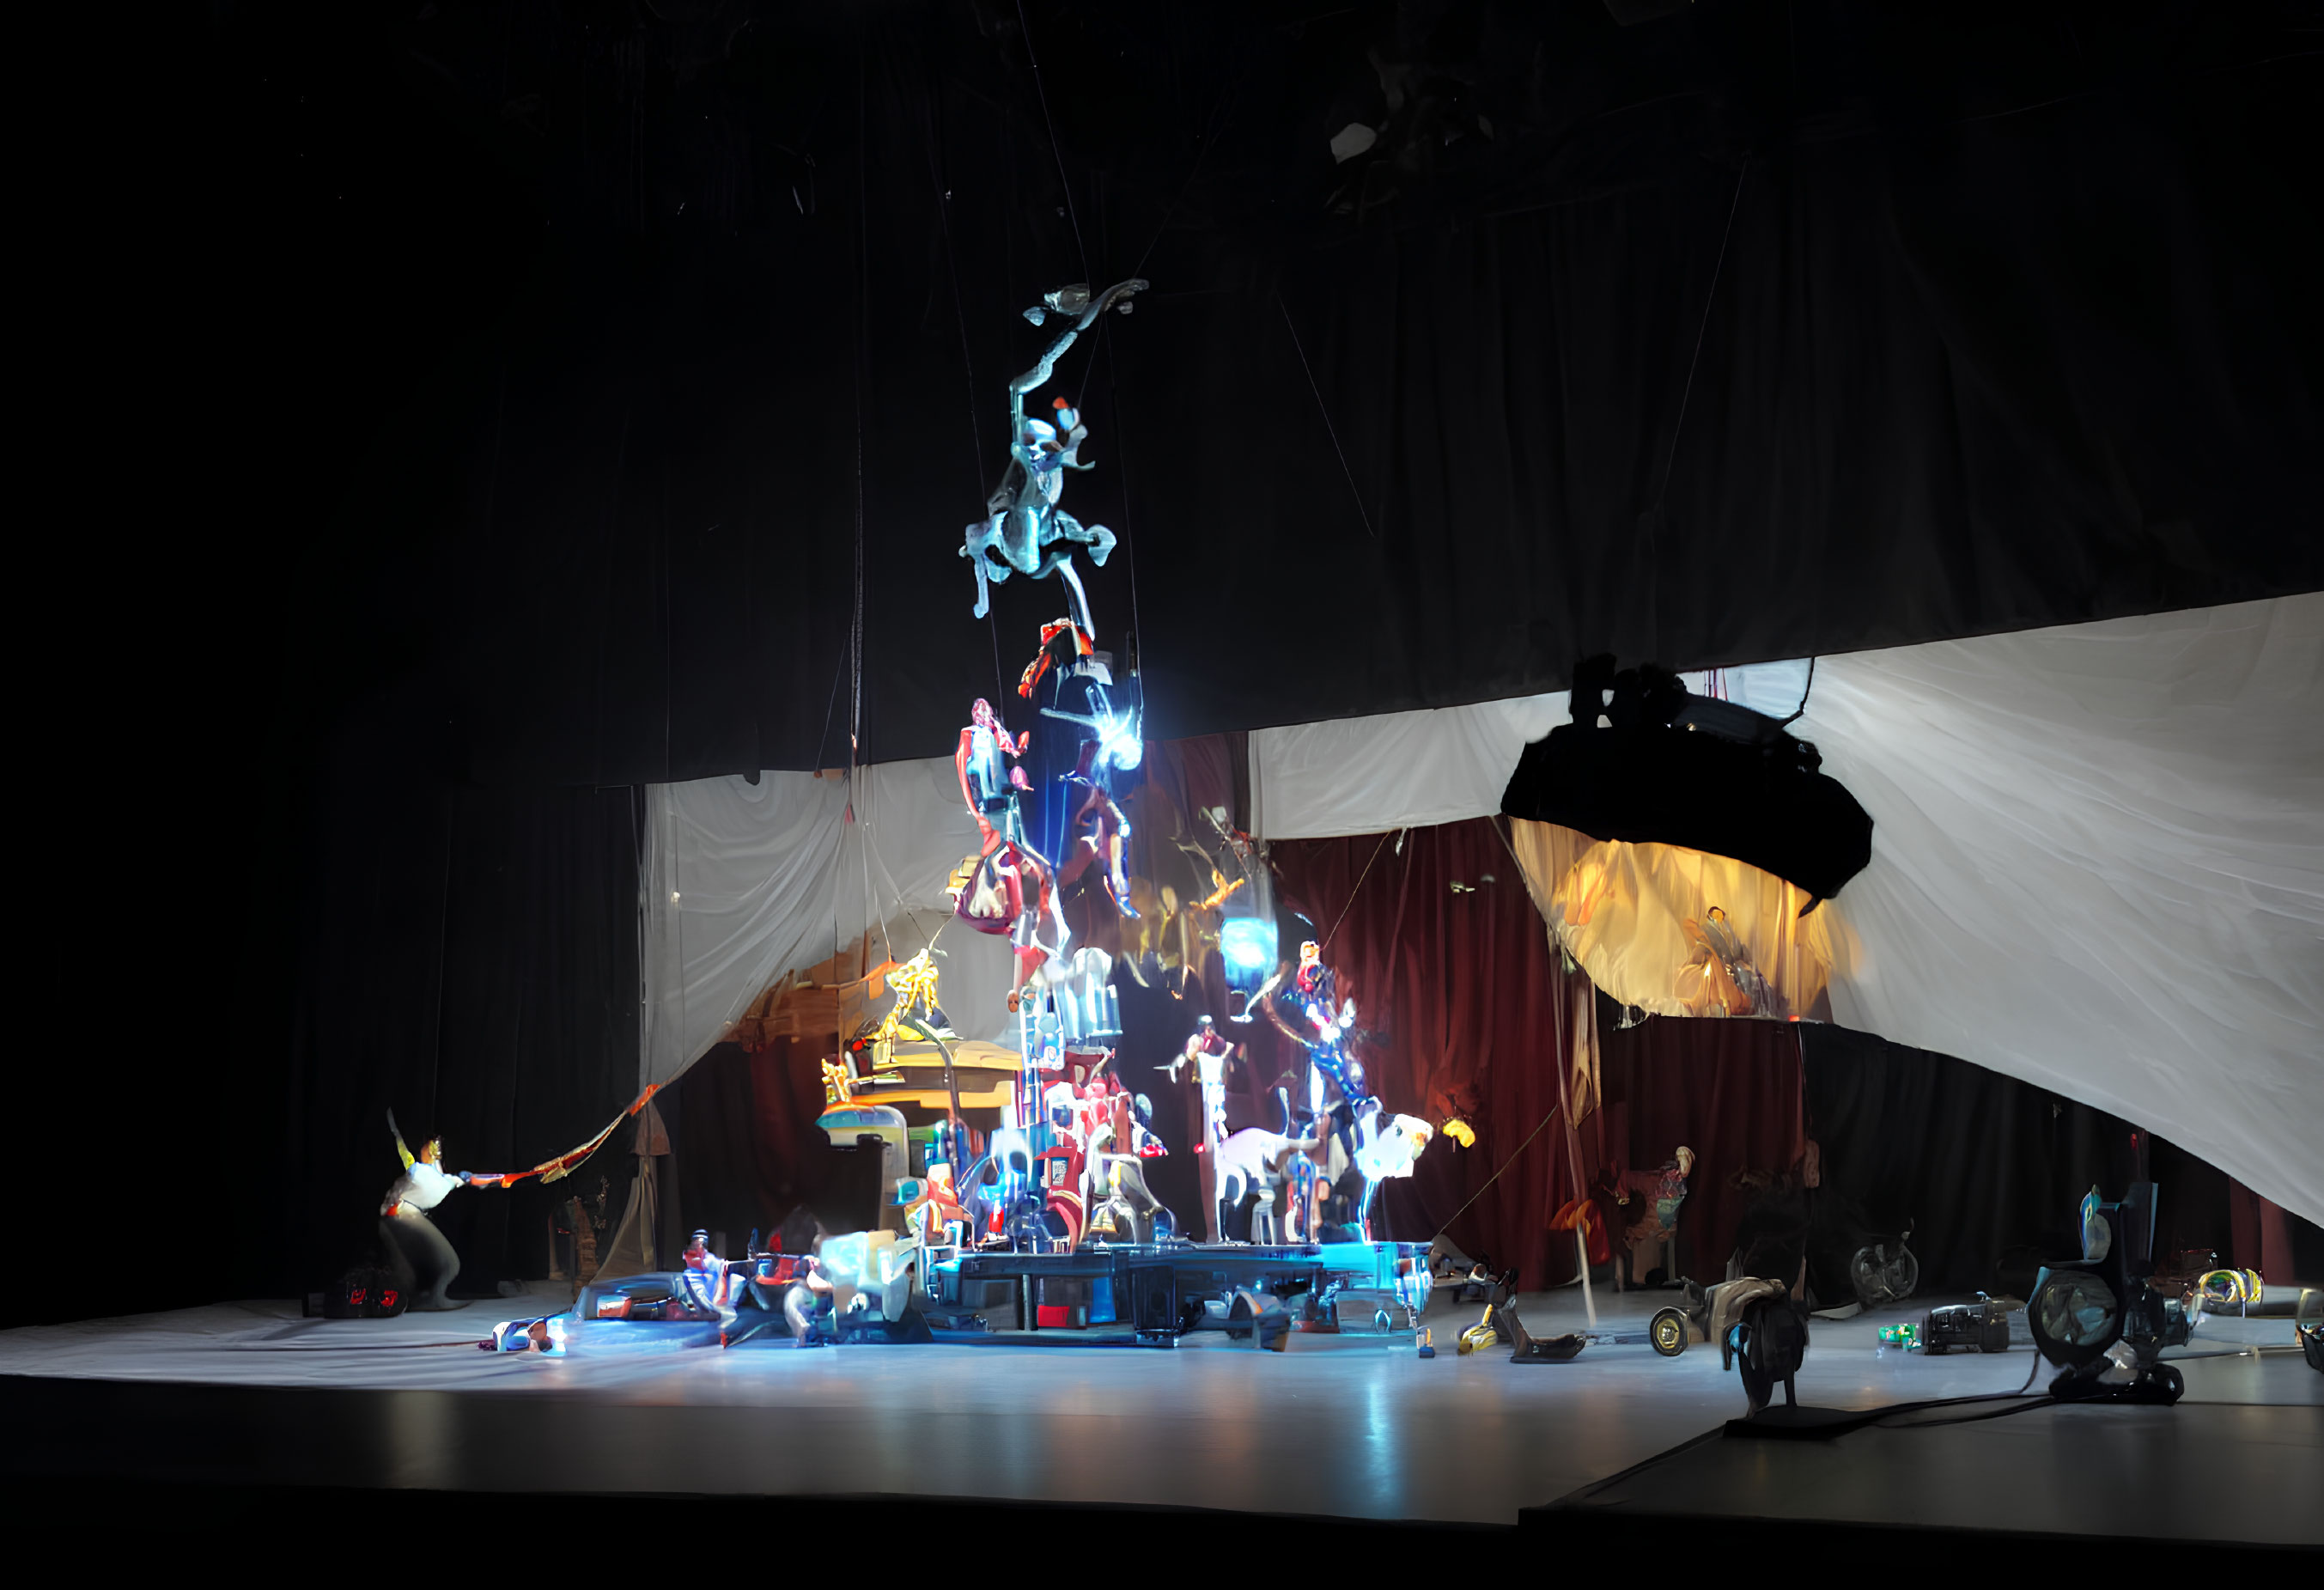 Vibrant theatrical stage with acrobatic performers in mid-air